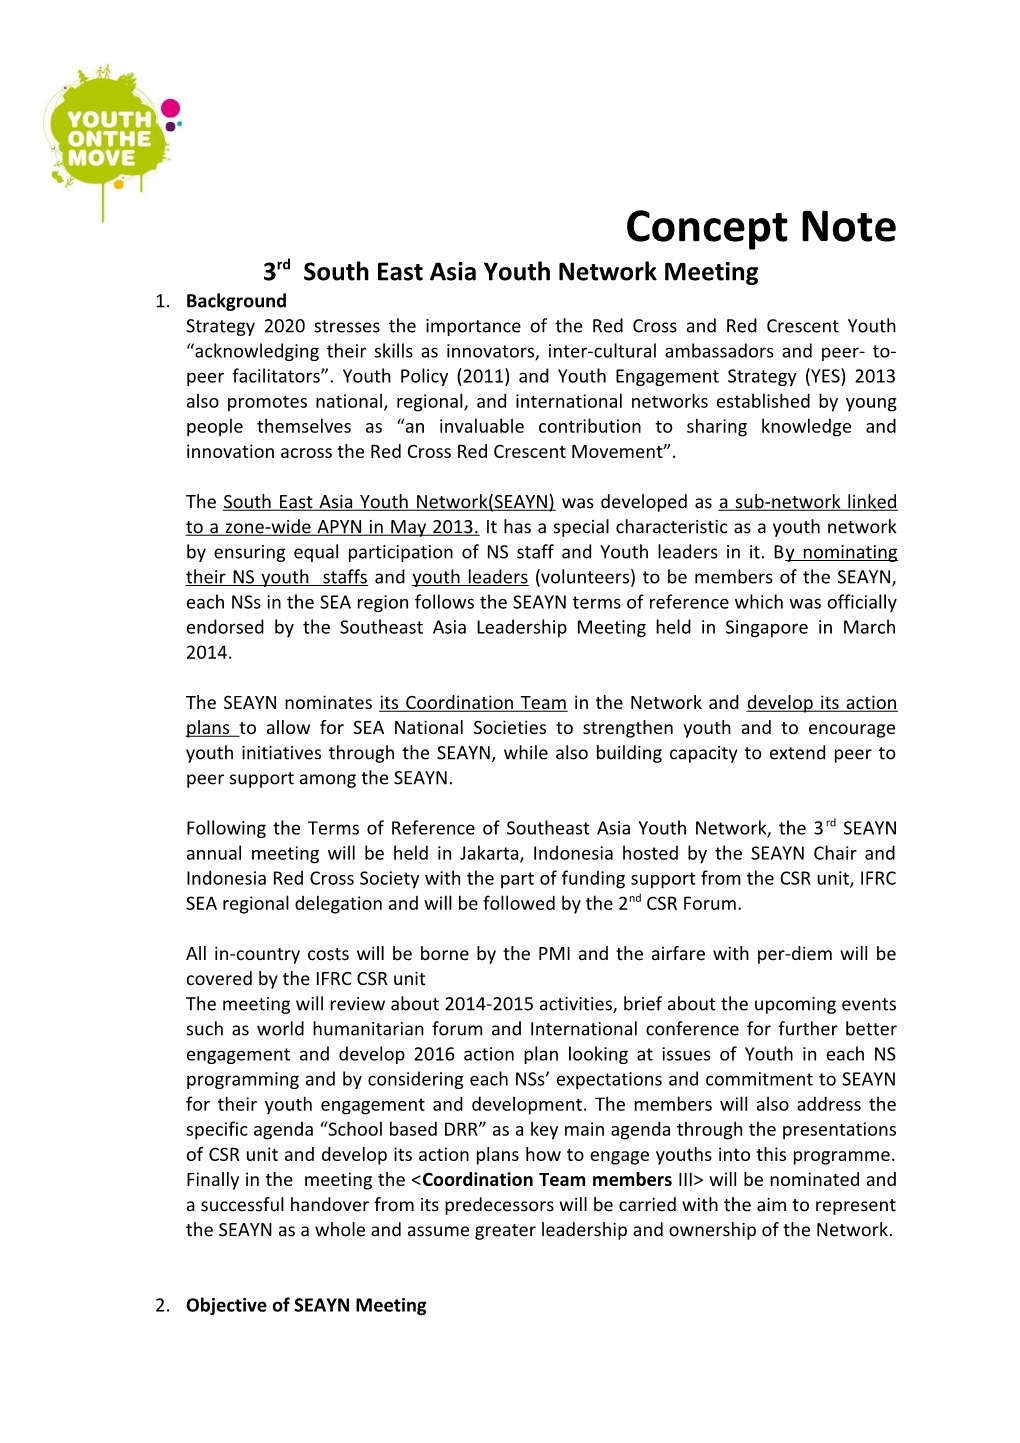 3Rd South East Asia Youth Network Meeting